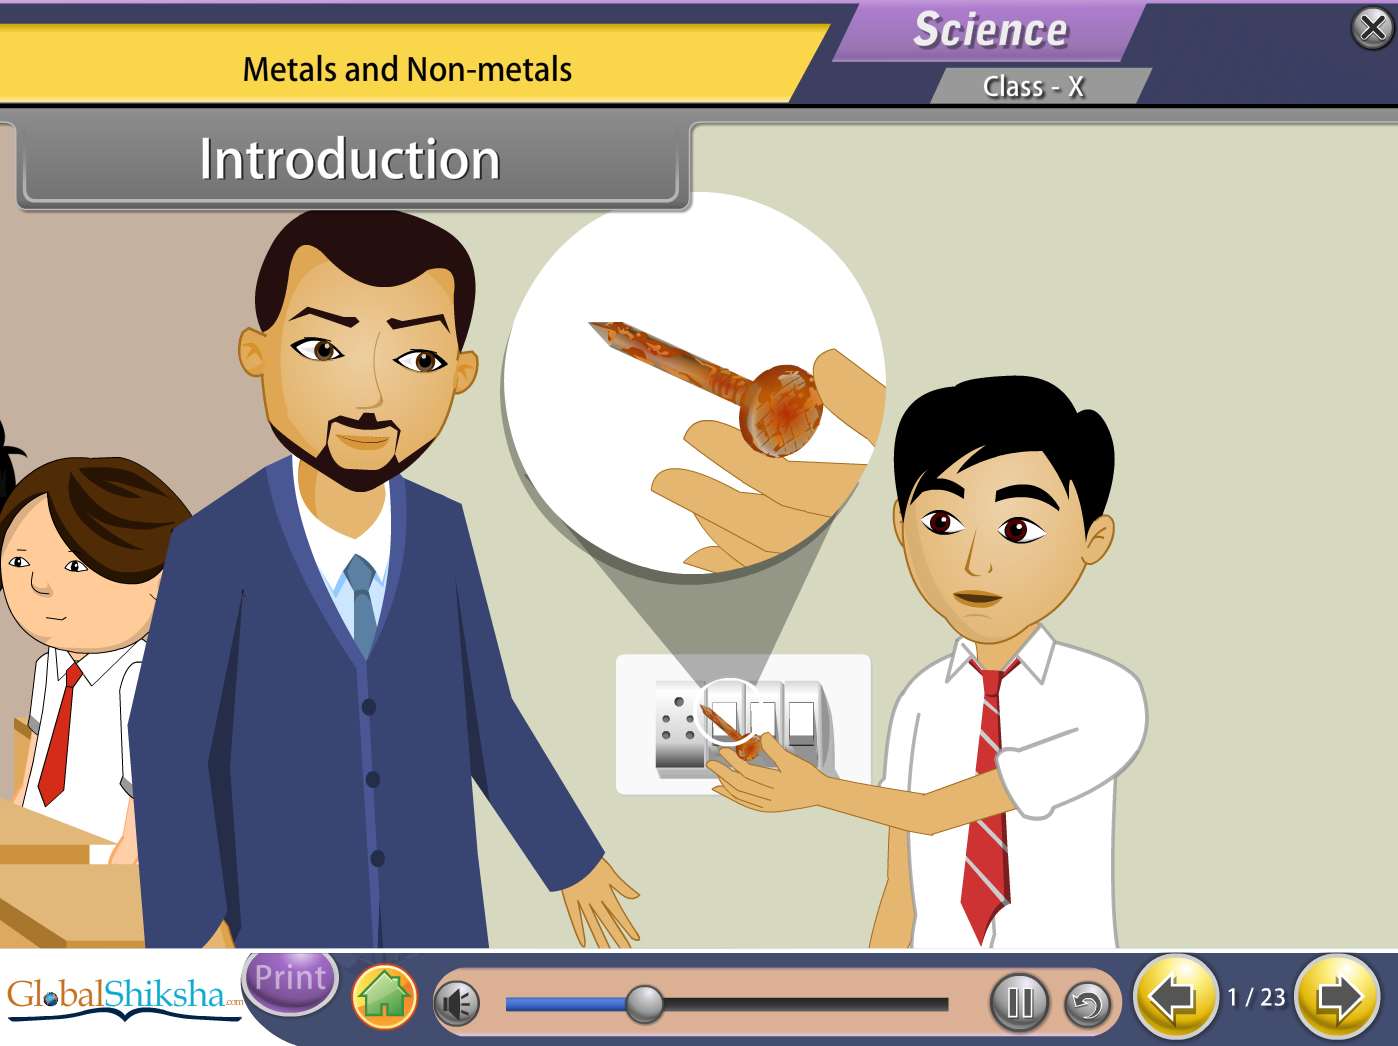 Rajasthan State Board Class 10 Maths & Science Animated Pendrive in English